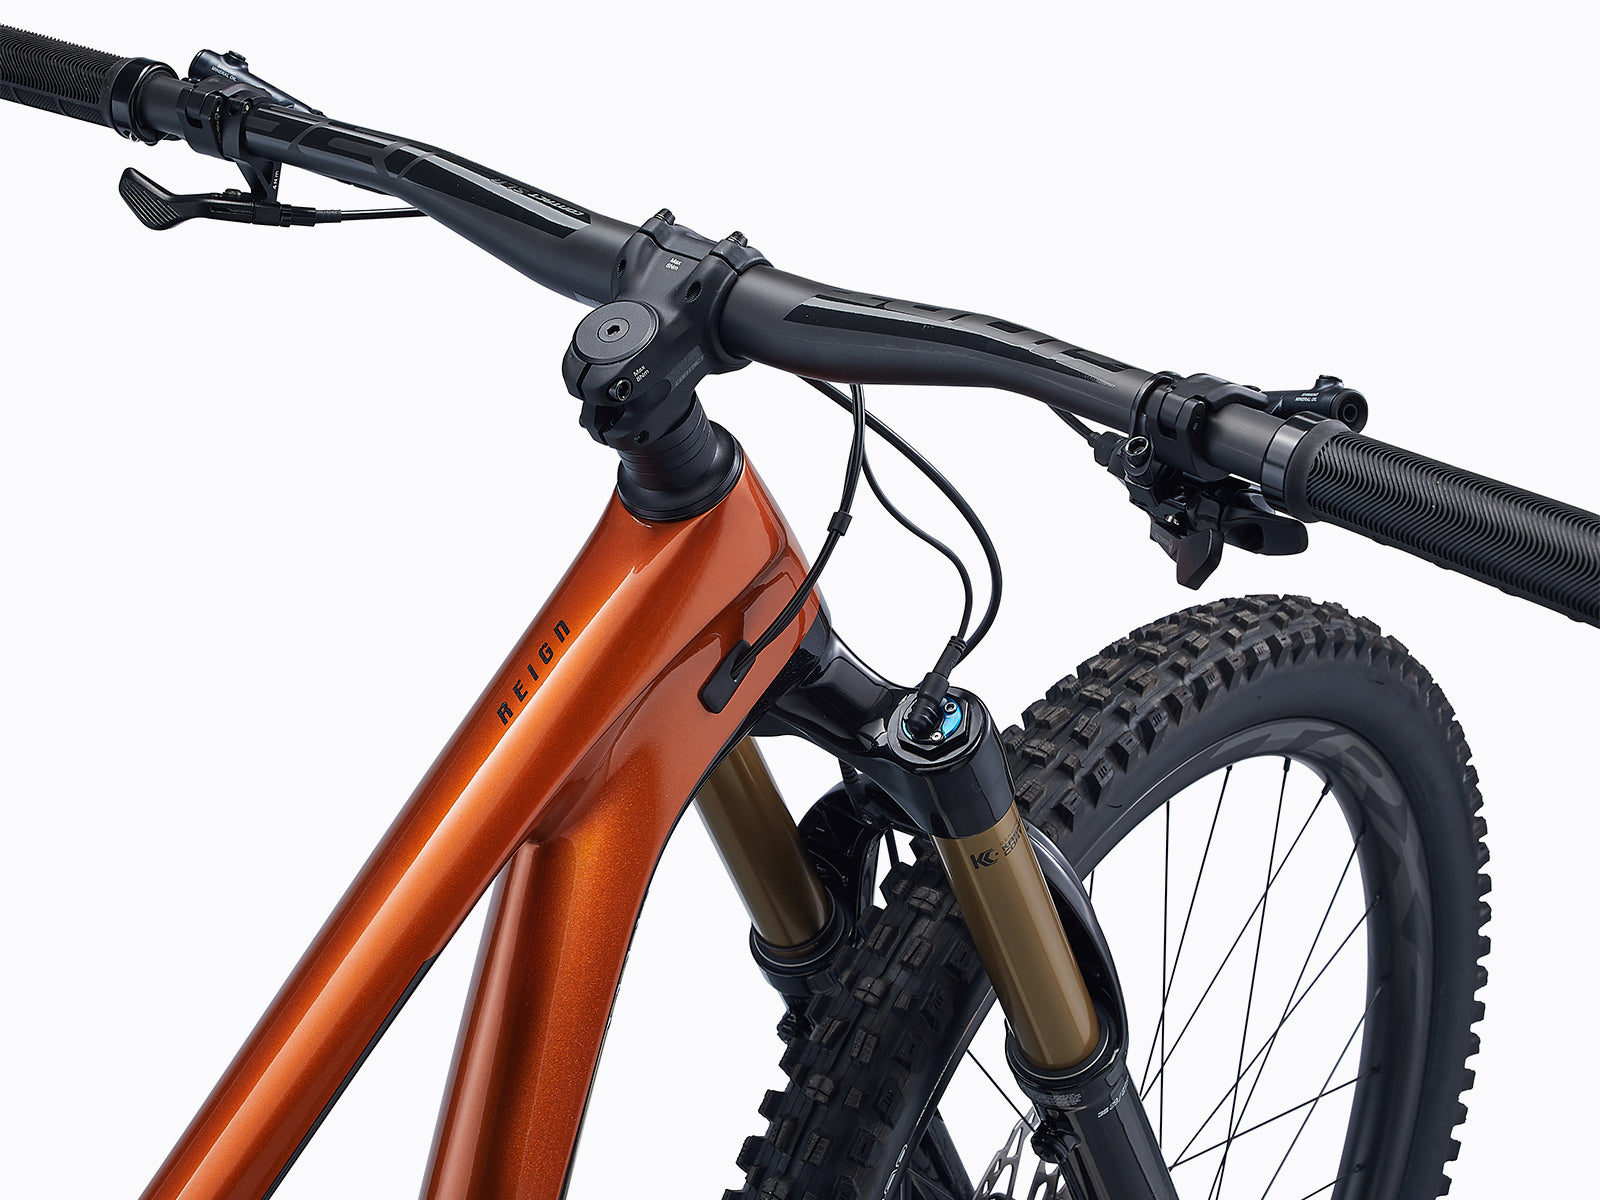 Image shows, giant reign advanced pro 29 1, a fat bike from Giant now sold at Giant Melbourne